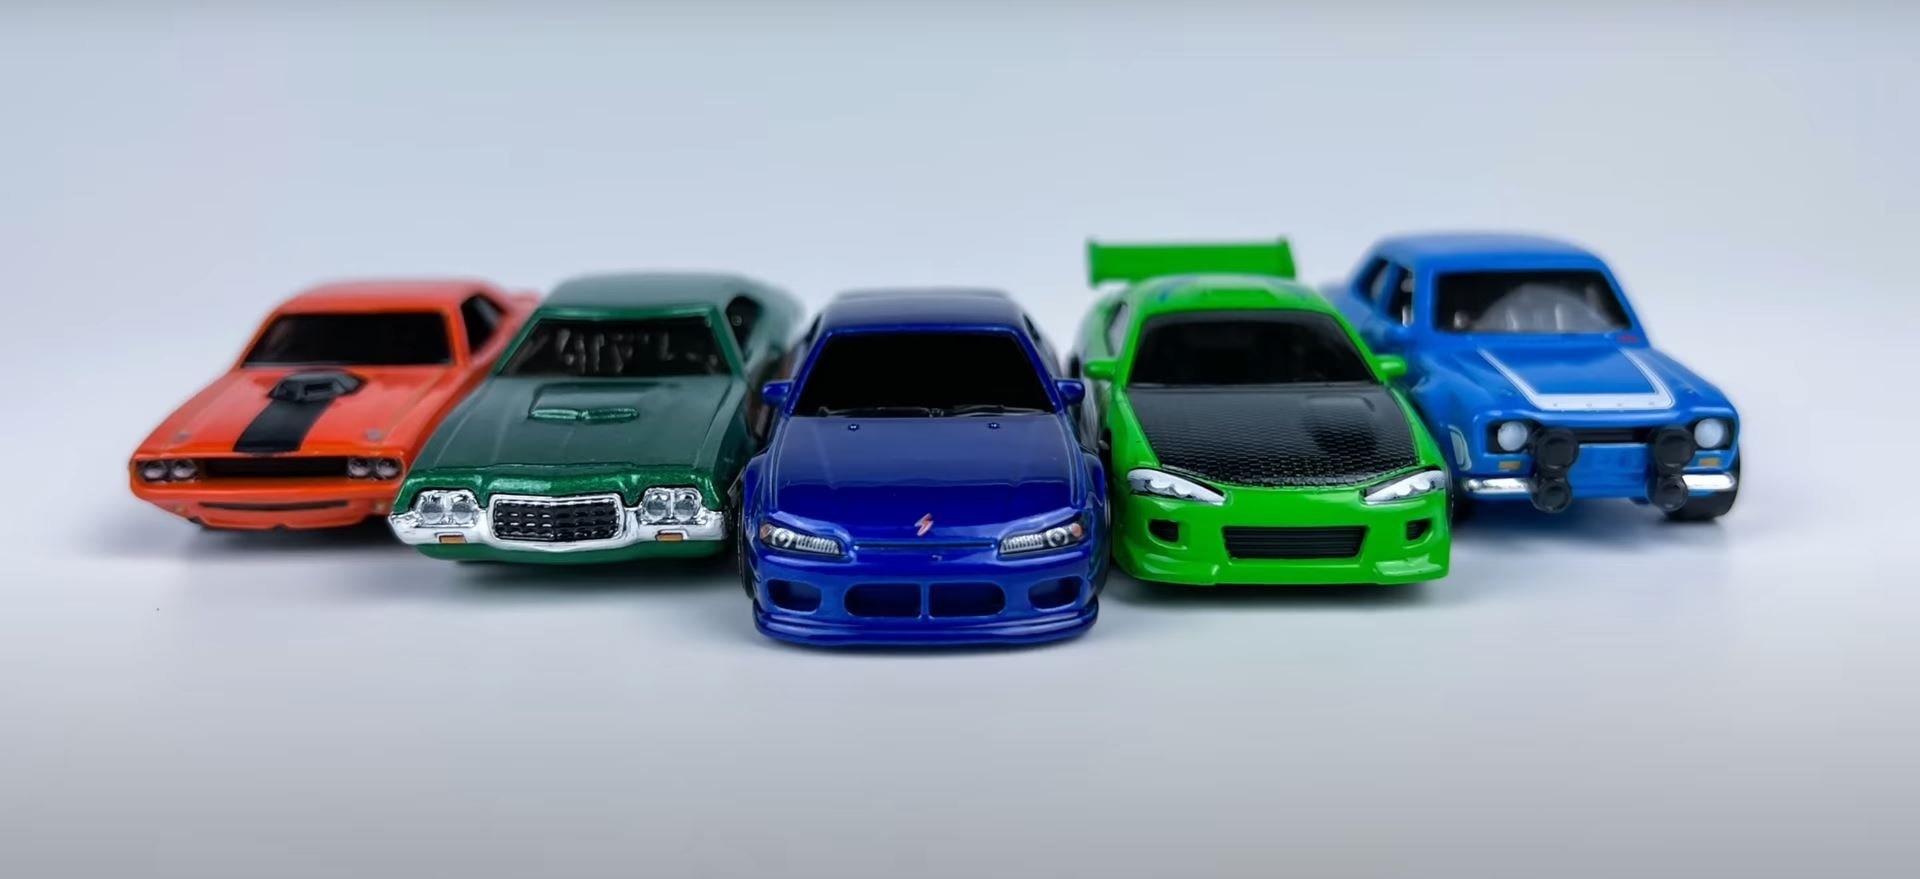 New Hot Wheels Set of 10 Cars Is a Nostalgic Throwback to the Fast